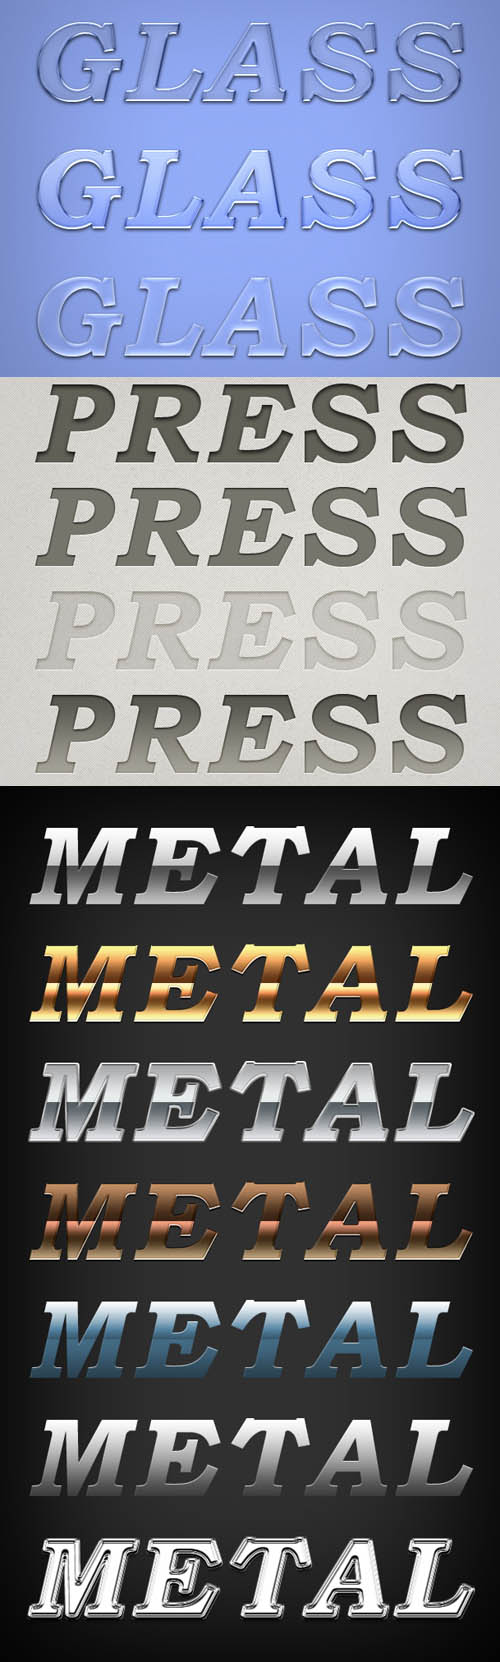 Letterpress, Glass and Metal Styles